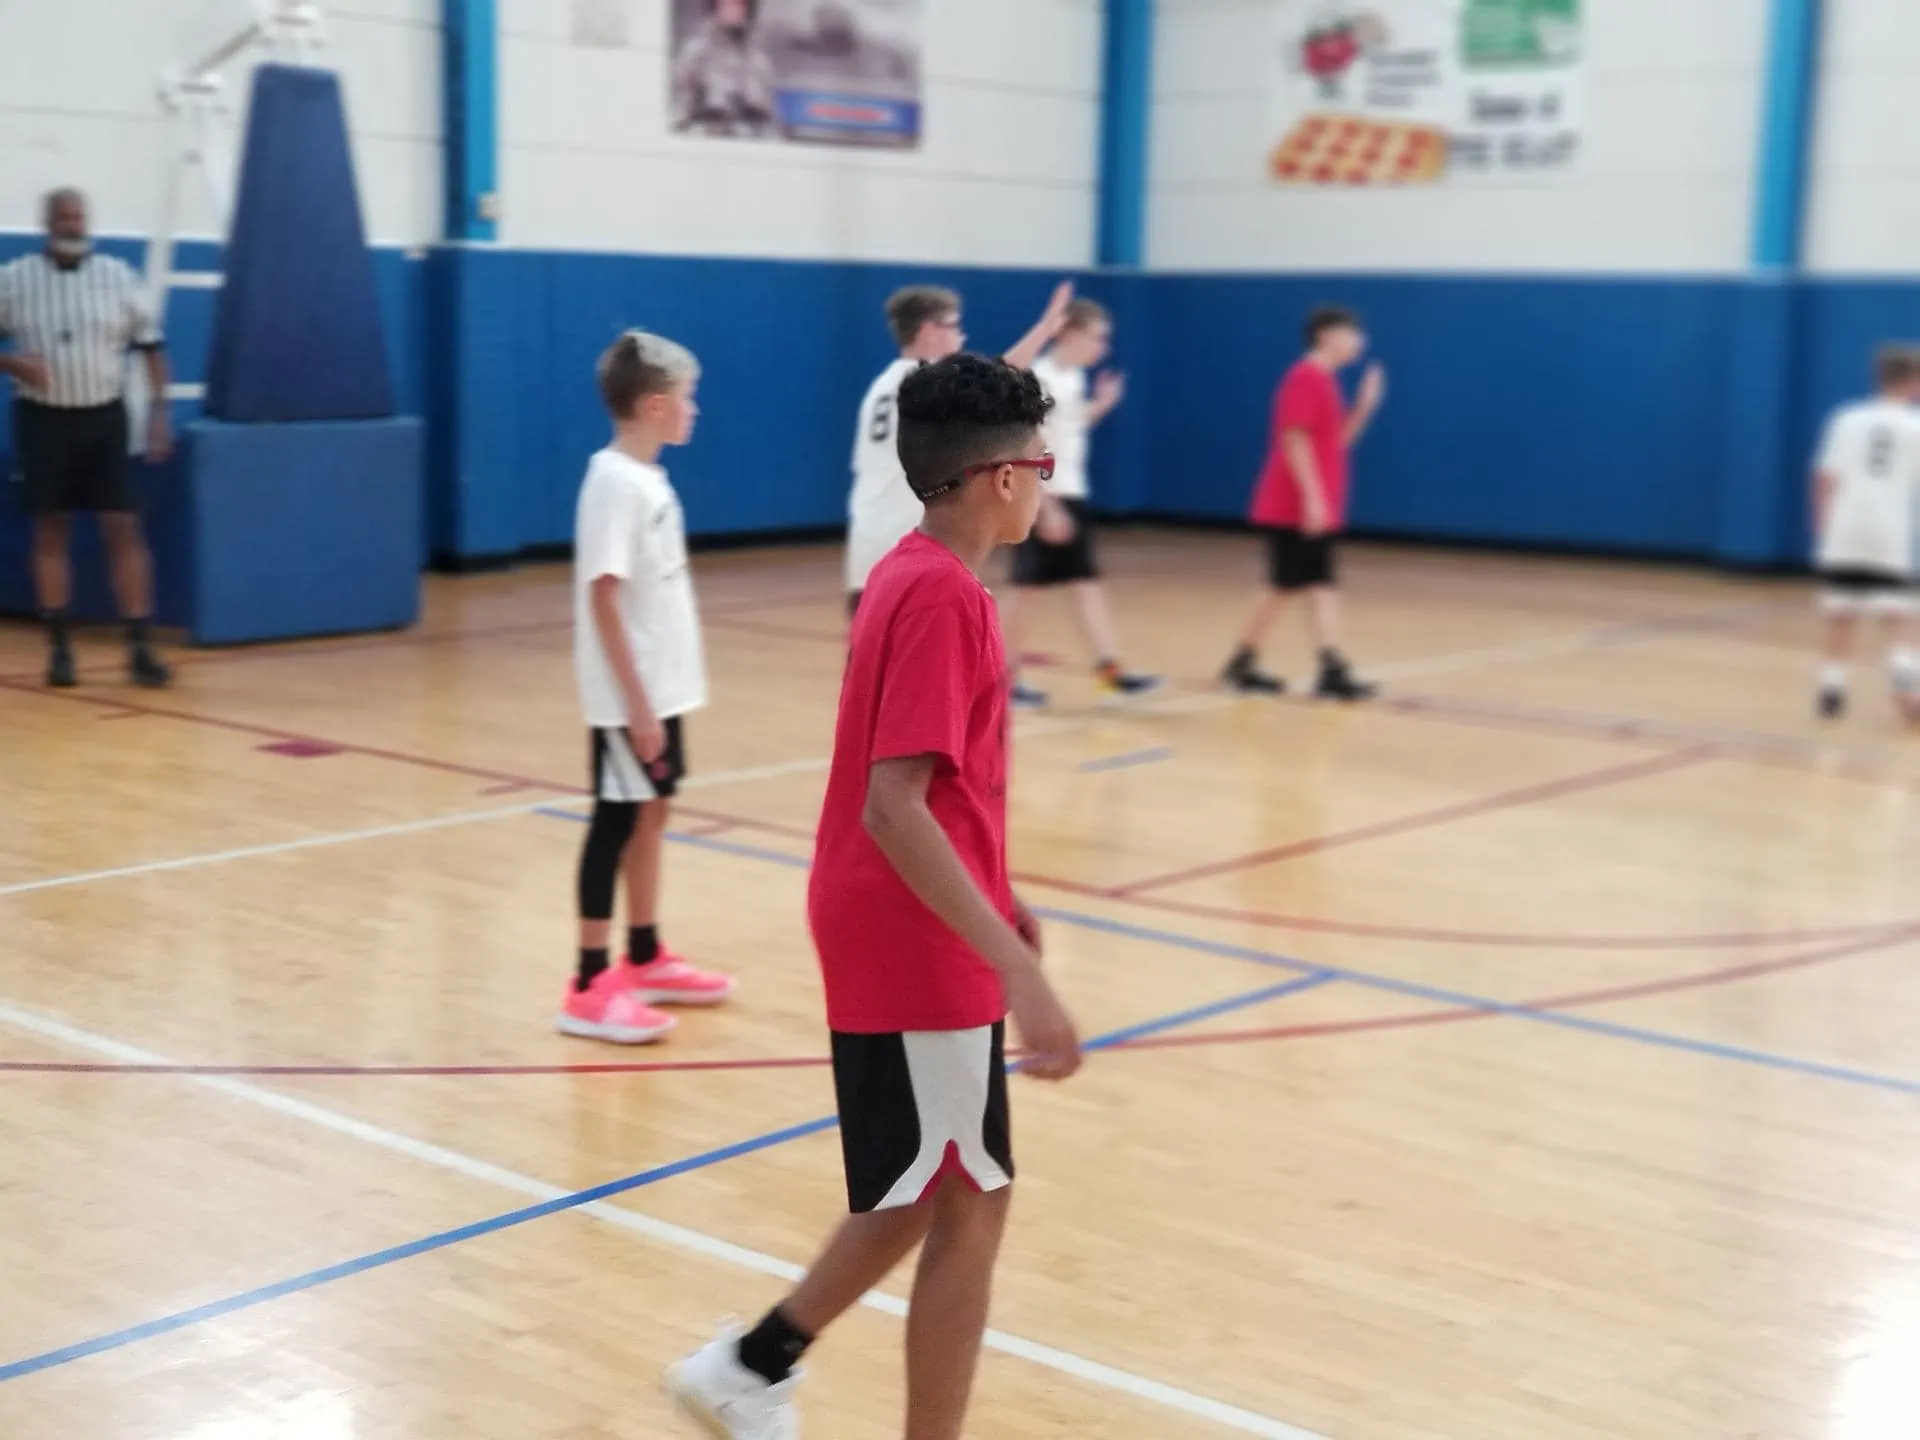 How to Coach Youth Basketball Game